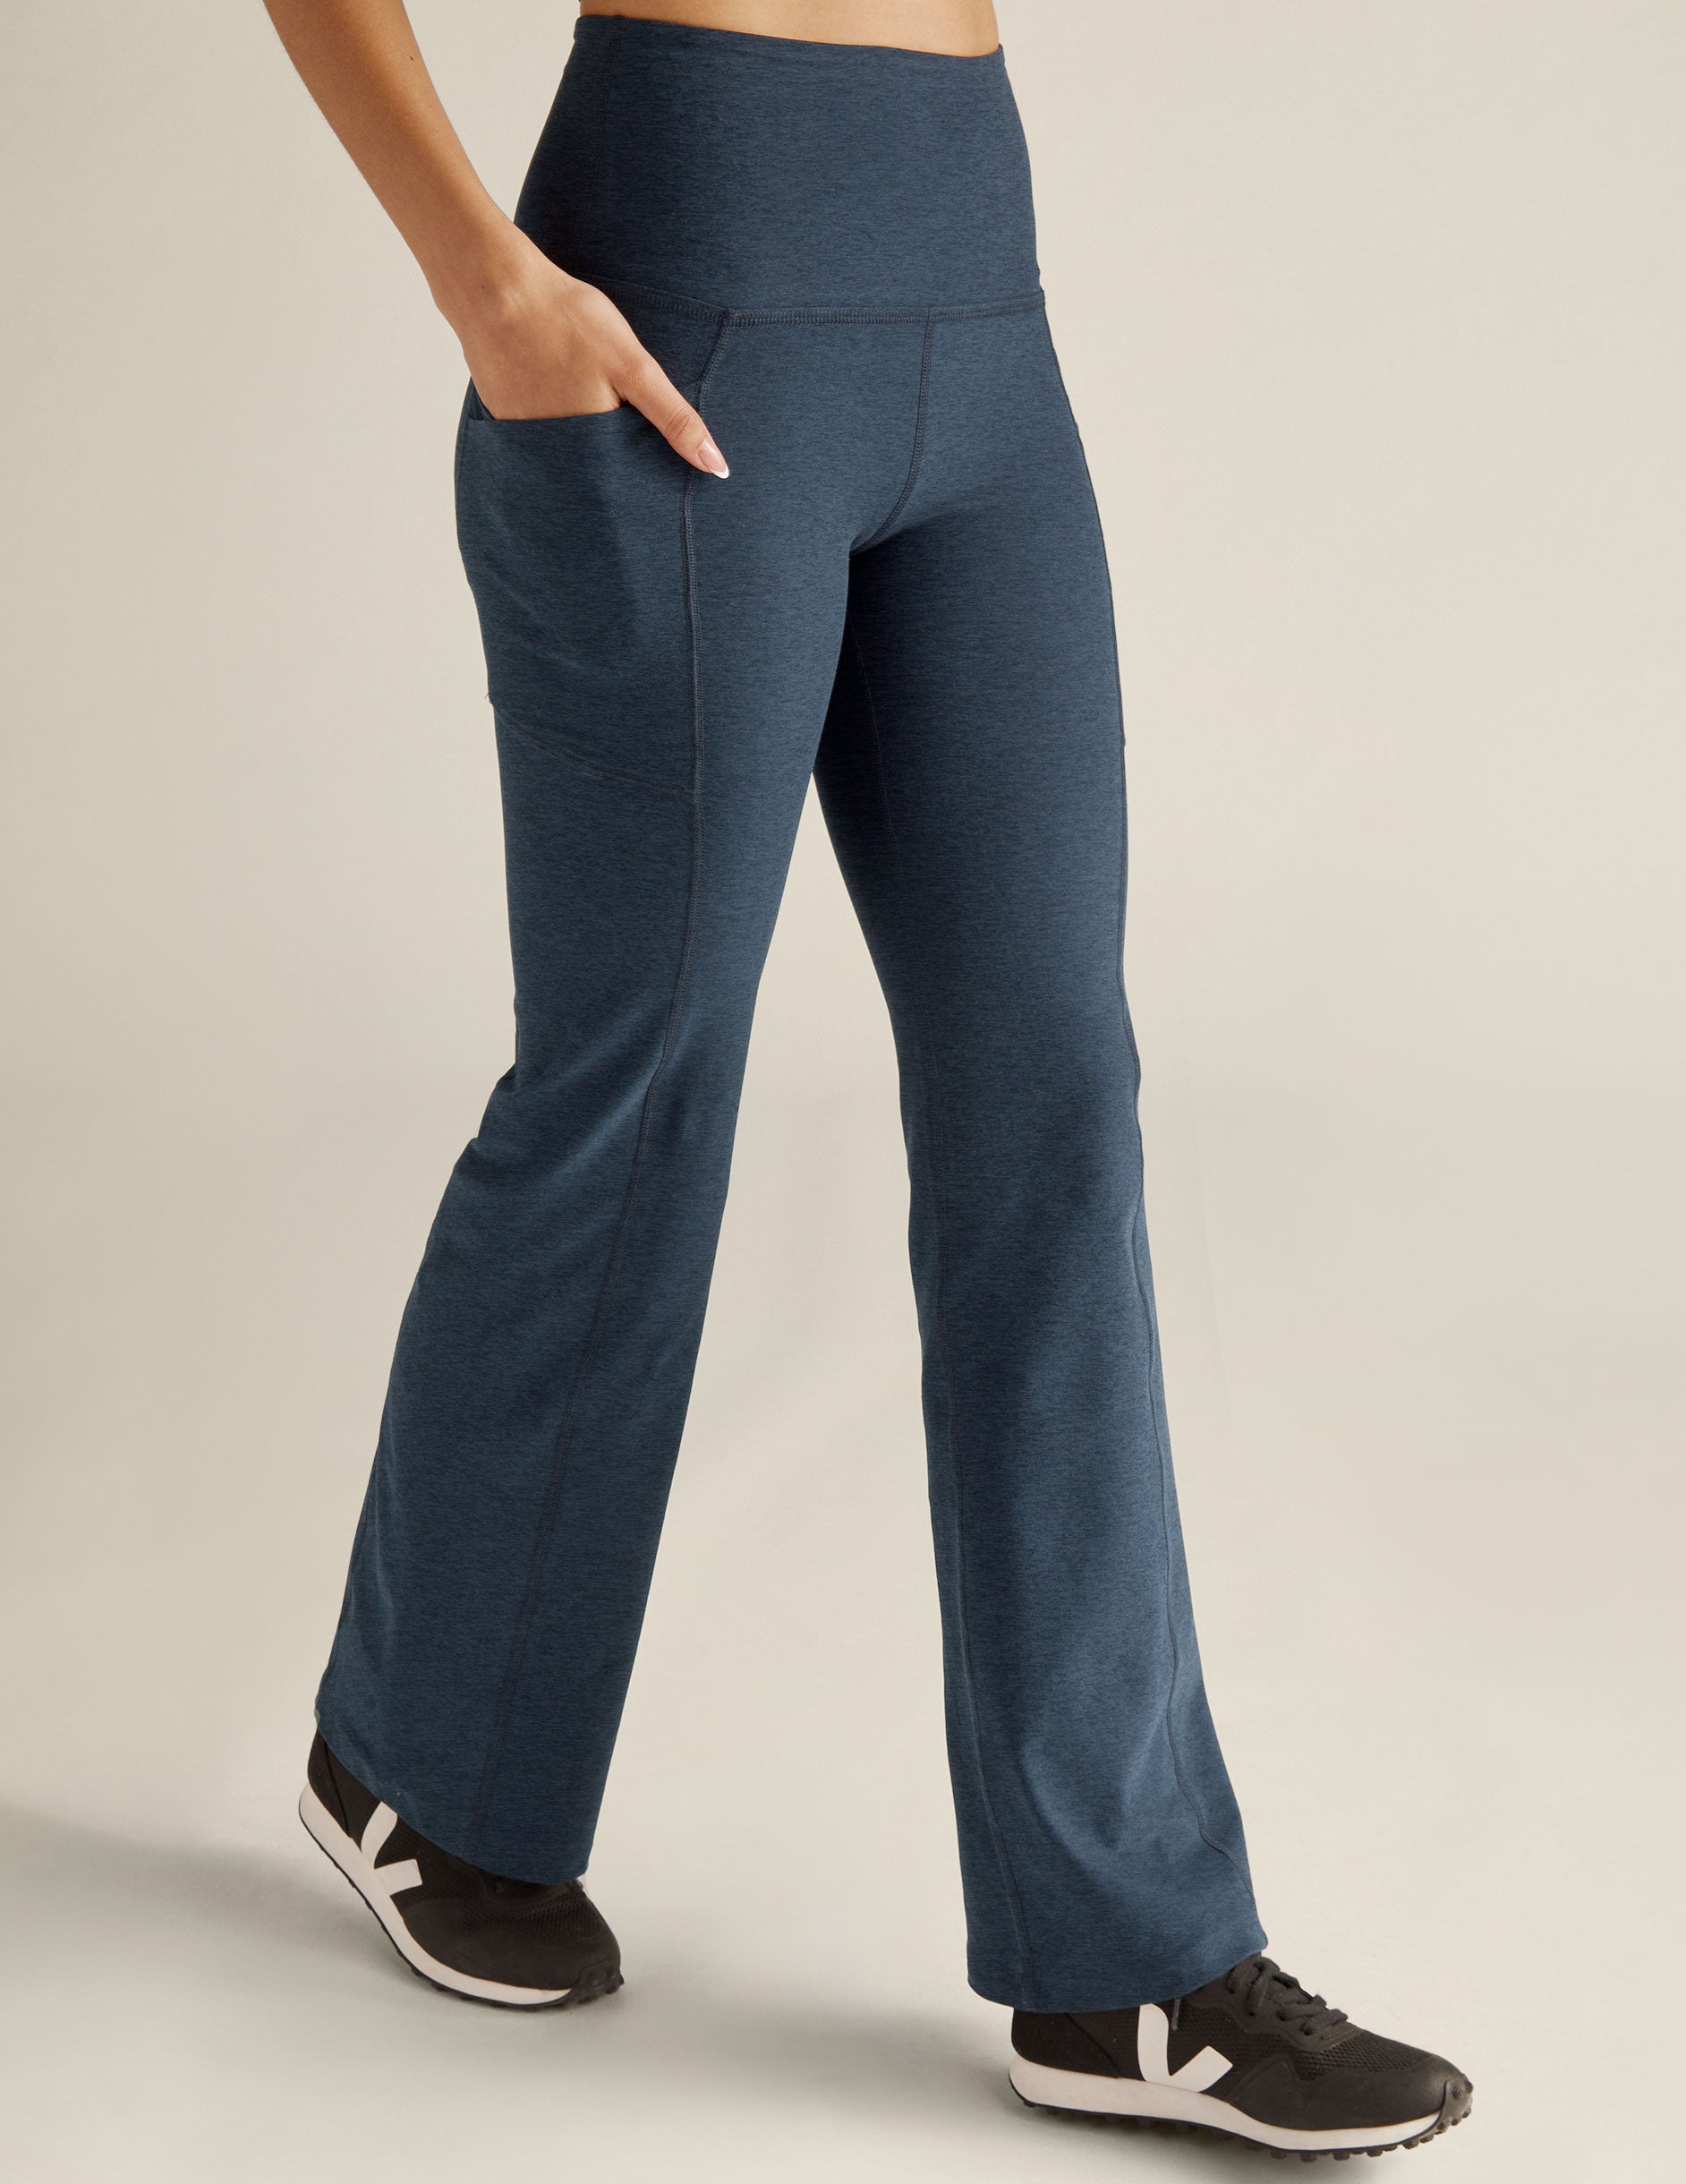 Lululemon Groove Pant Bootcut 32 - True Navy (First Release